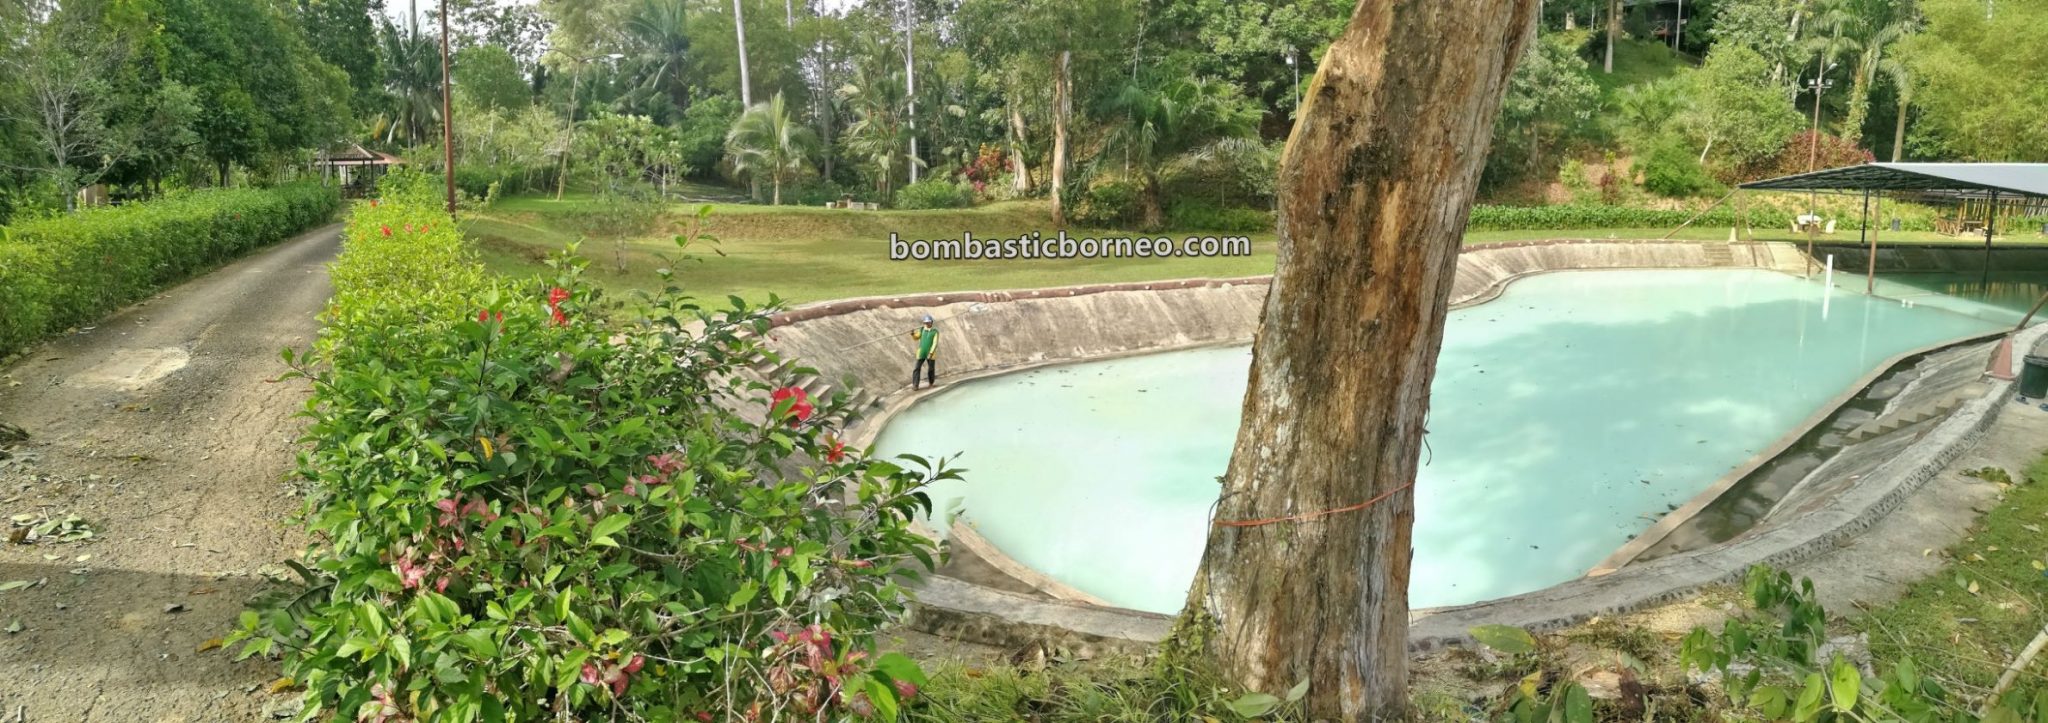 Sankina Hotspring Park, healthy, nature, outdoor, recreational, water park, destination, family holiday, Sabah, Malaysia, Tawau, Tourism, tourist attraction, Travel guide, Trans Borneo,